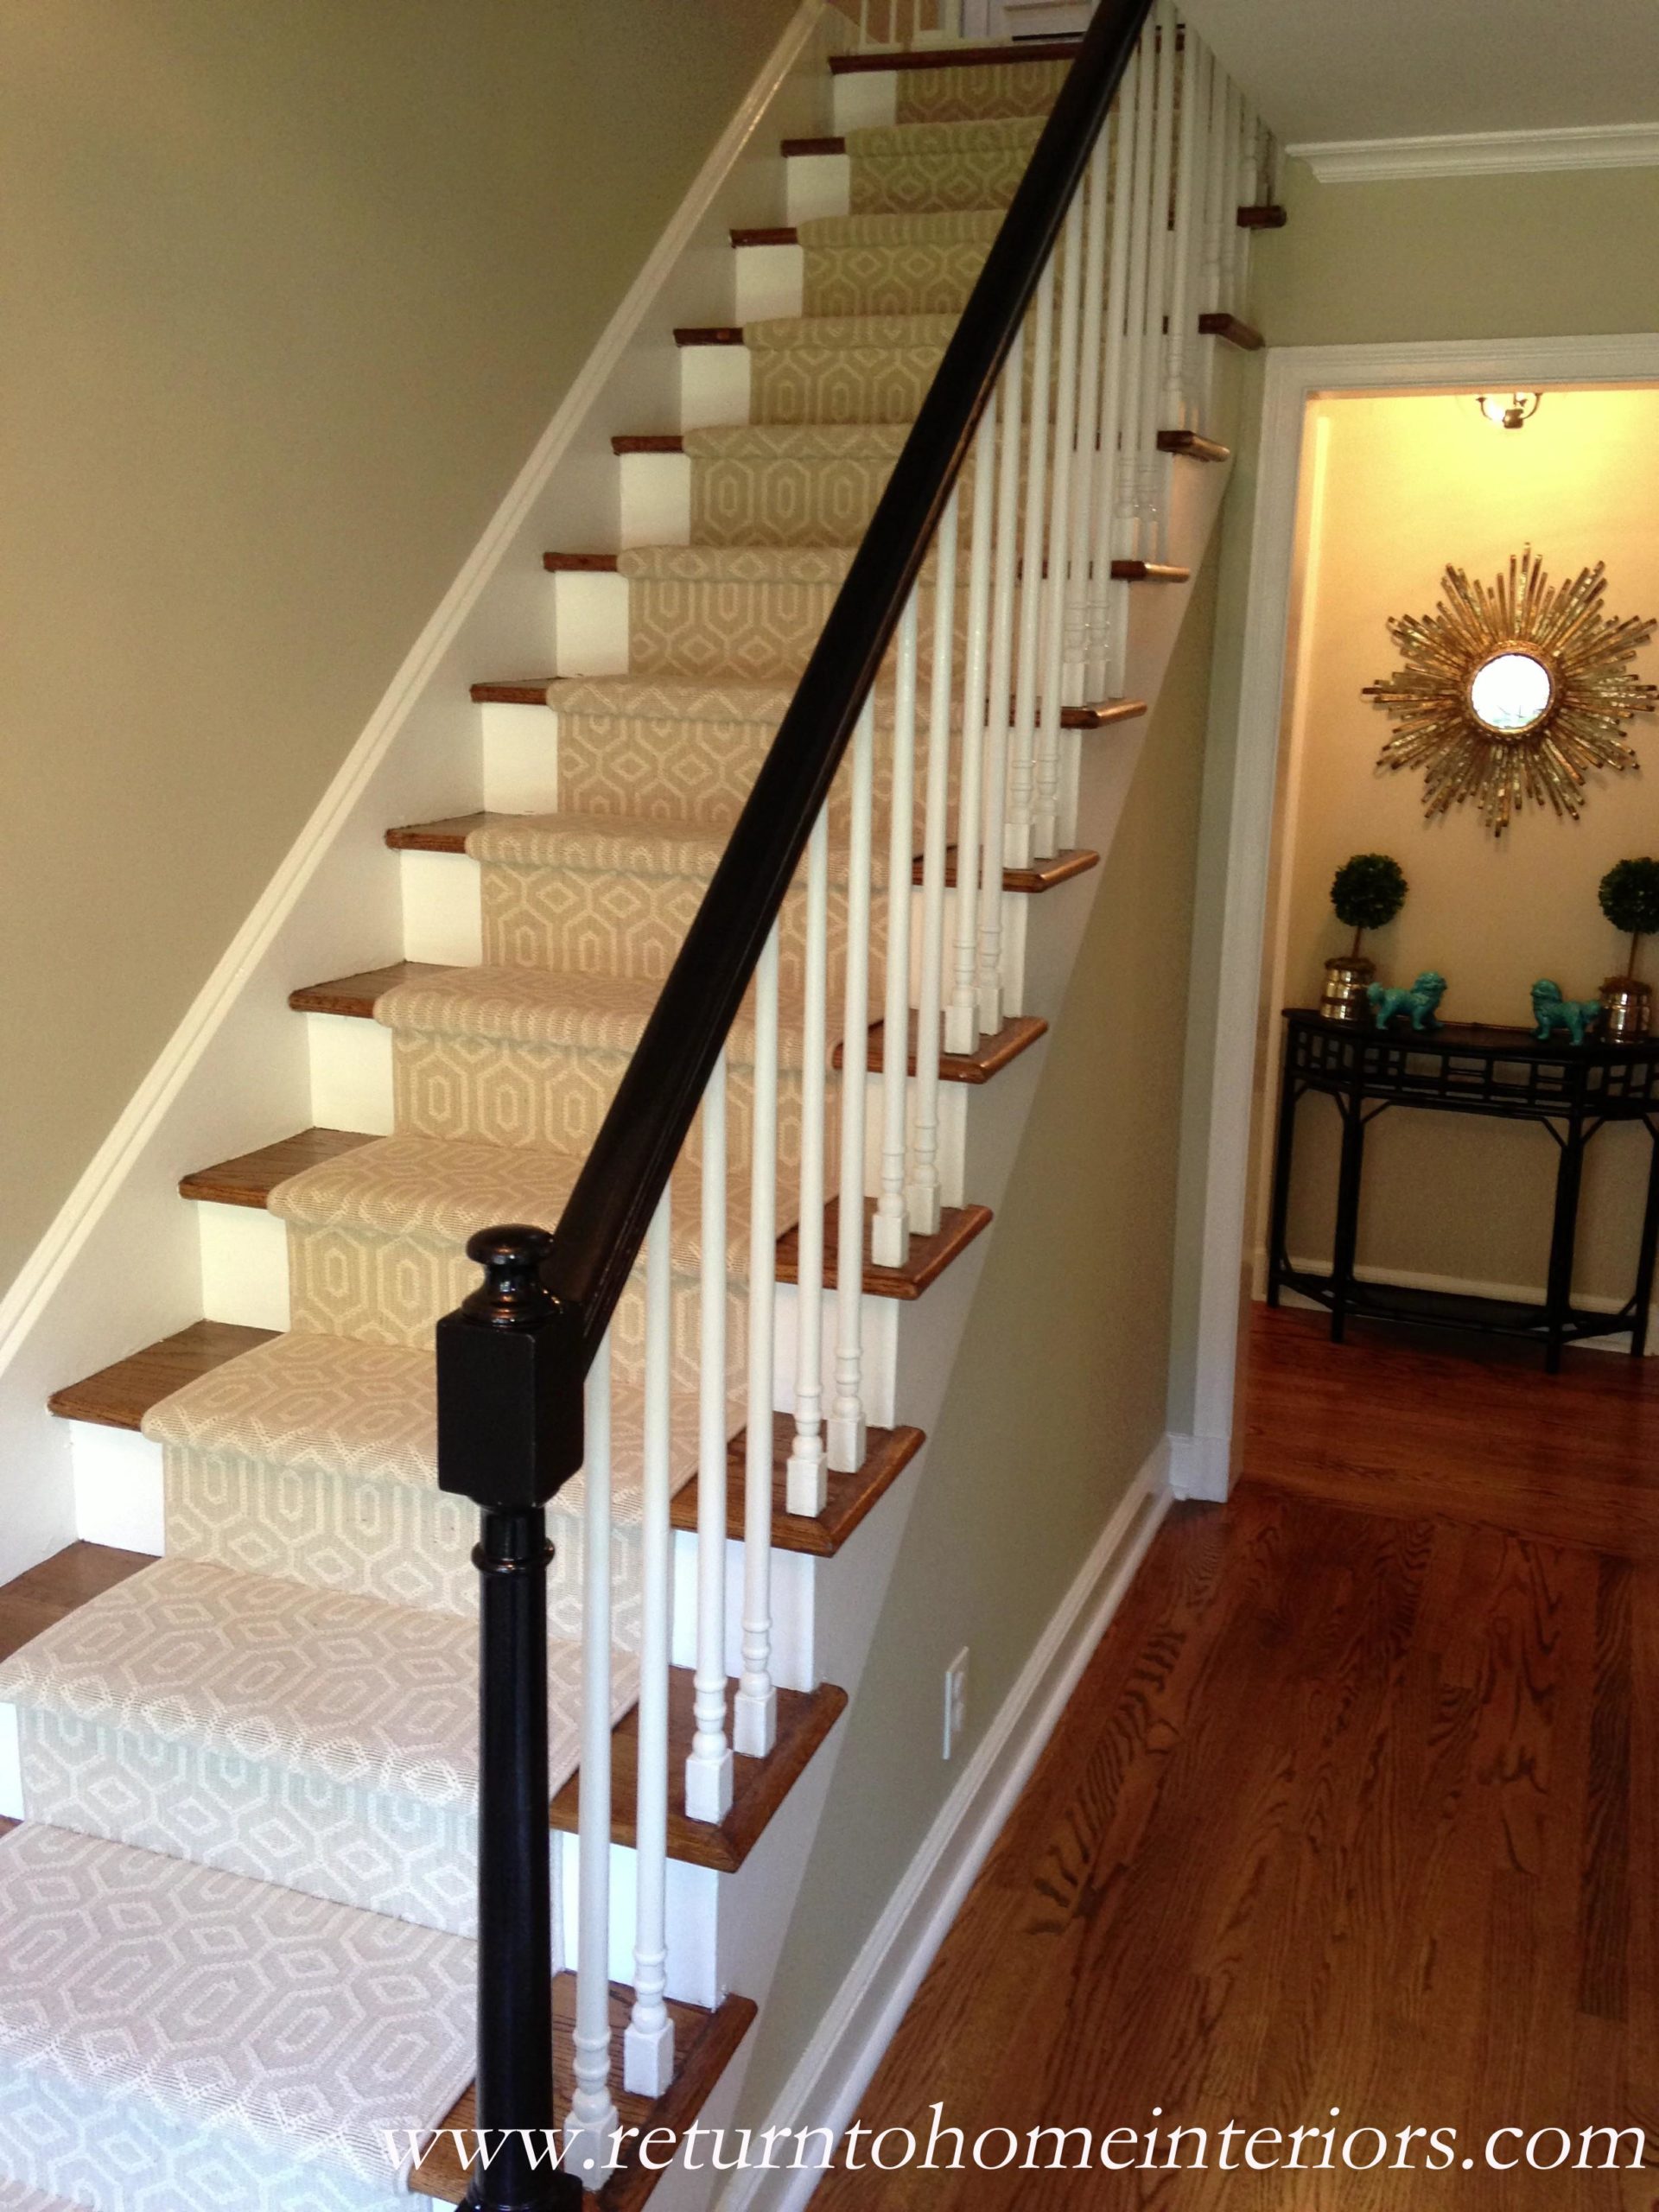 How to Choose the Best Carpet for Stairs